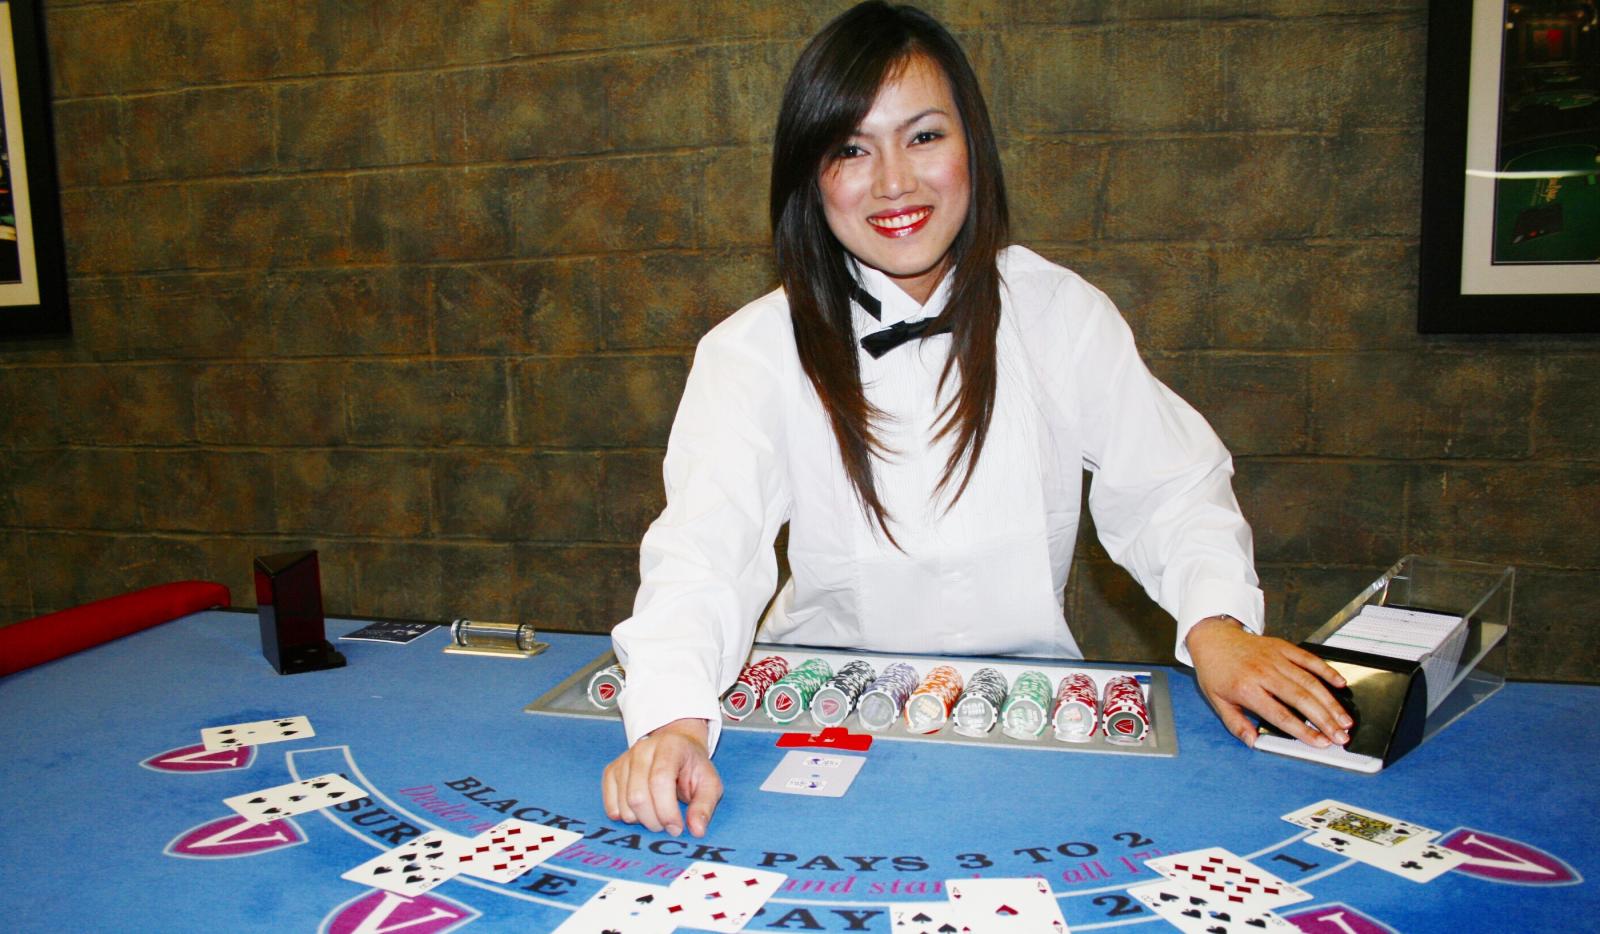 How to Select Casino Uniforms for Women